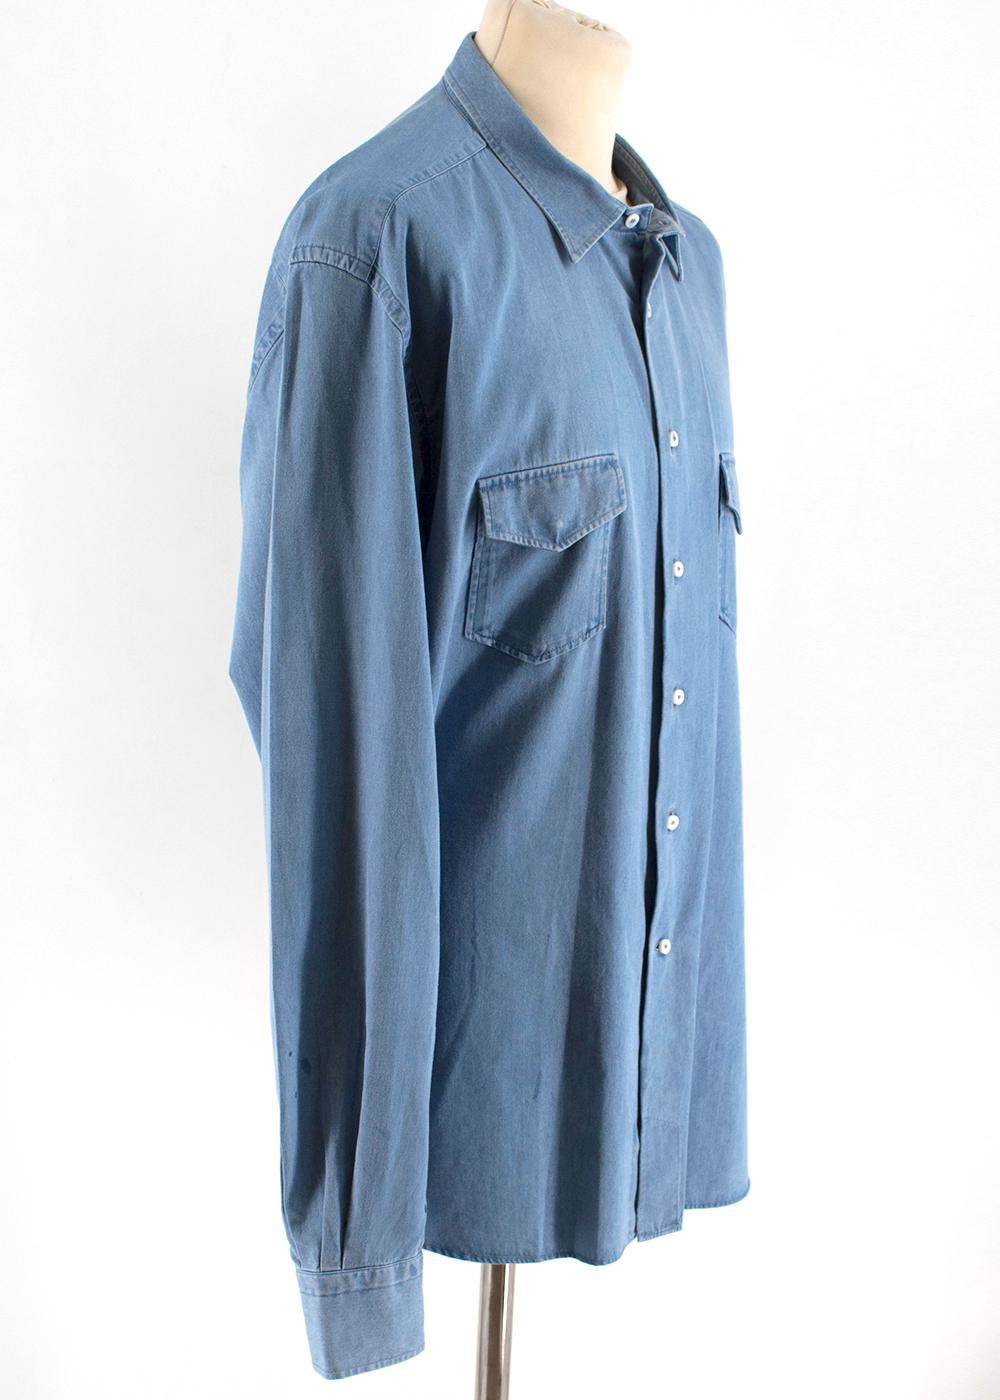 Loro Piana Regular Fit Chambray Shirt

- Light blue chambray shirt
- Lightweight
- Regular fit
- Centre-front button fastening
- Pointed collar
- Chest flap pockets
- Buttoned cuffs
- Side logo patch

Please note, these items are pre-owned and may